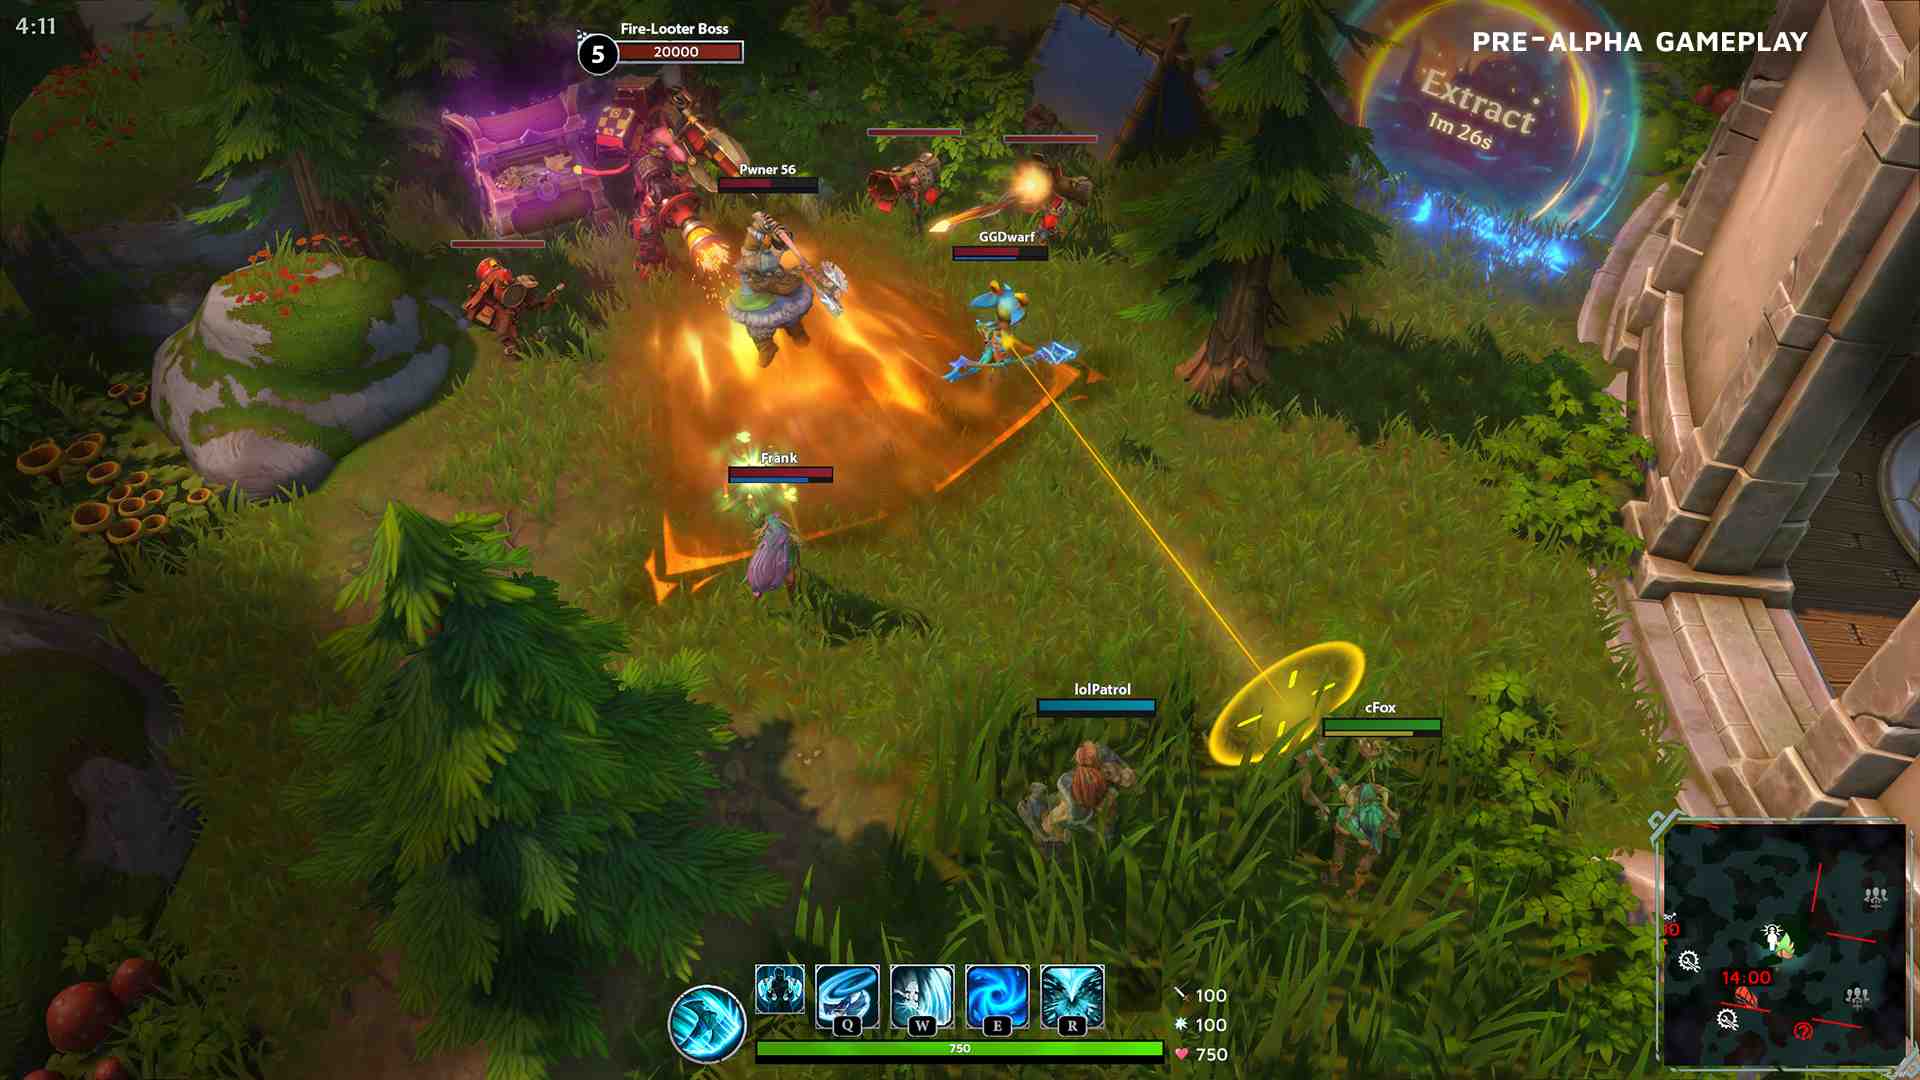 In game screenshot of two teams facing a Fire-Looter Boss besides an extract portal.